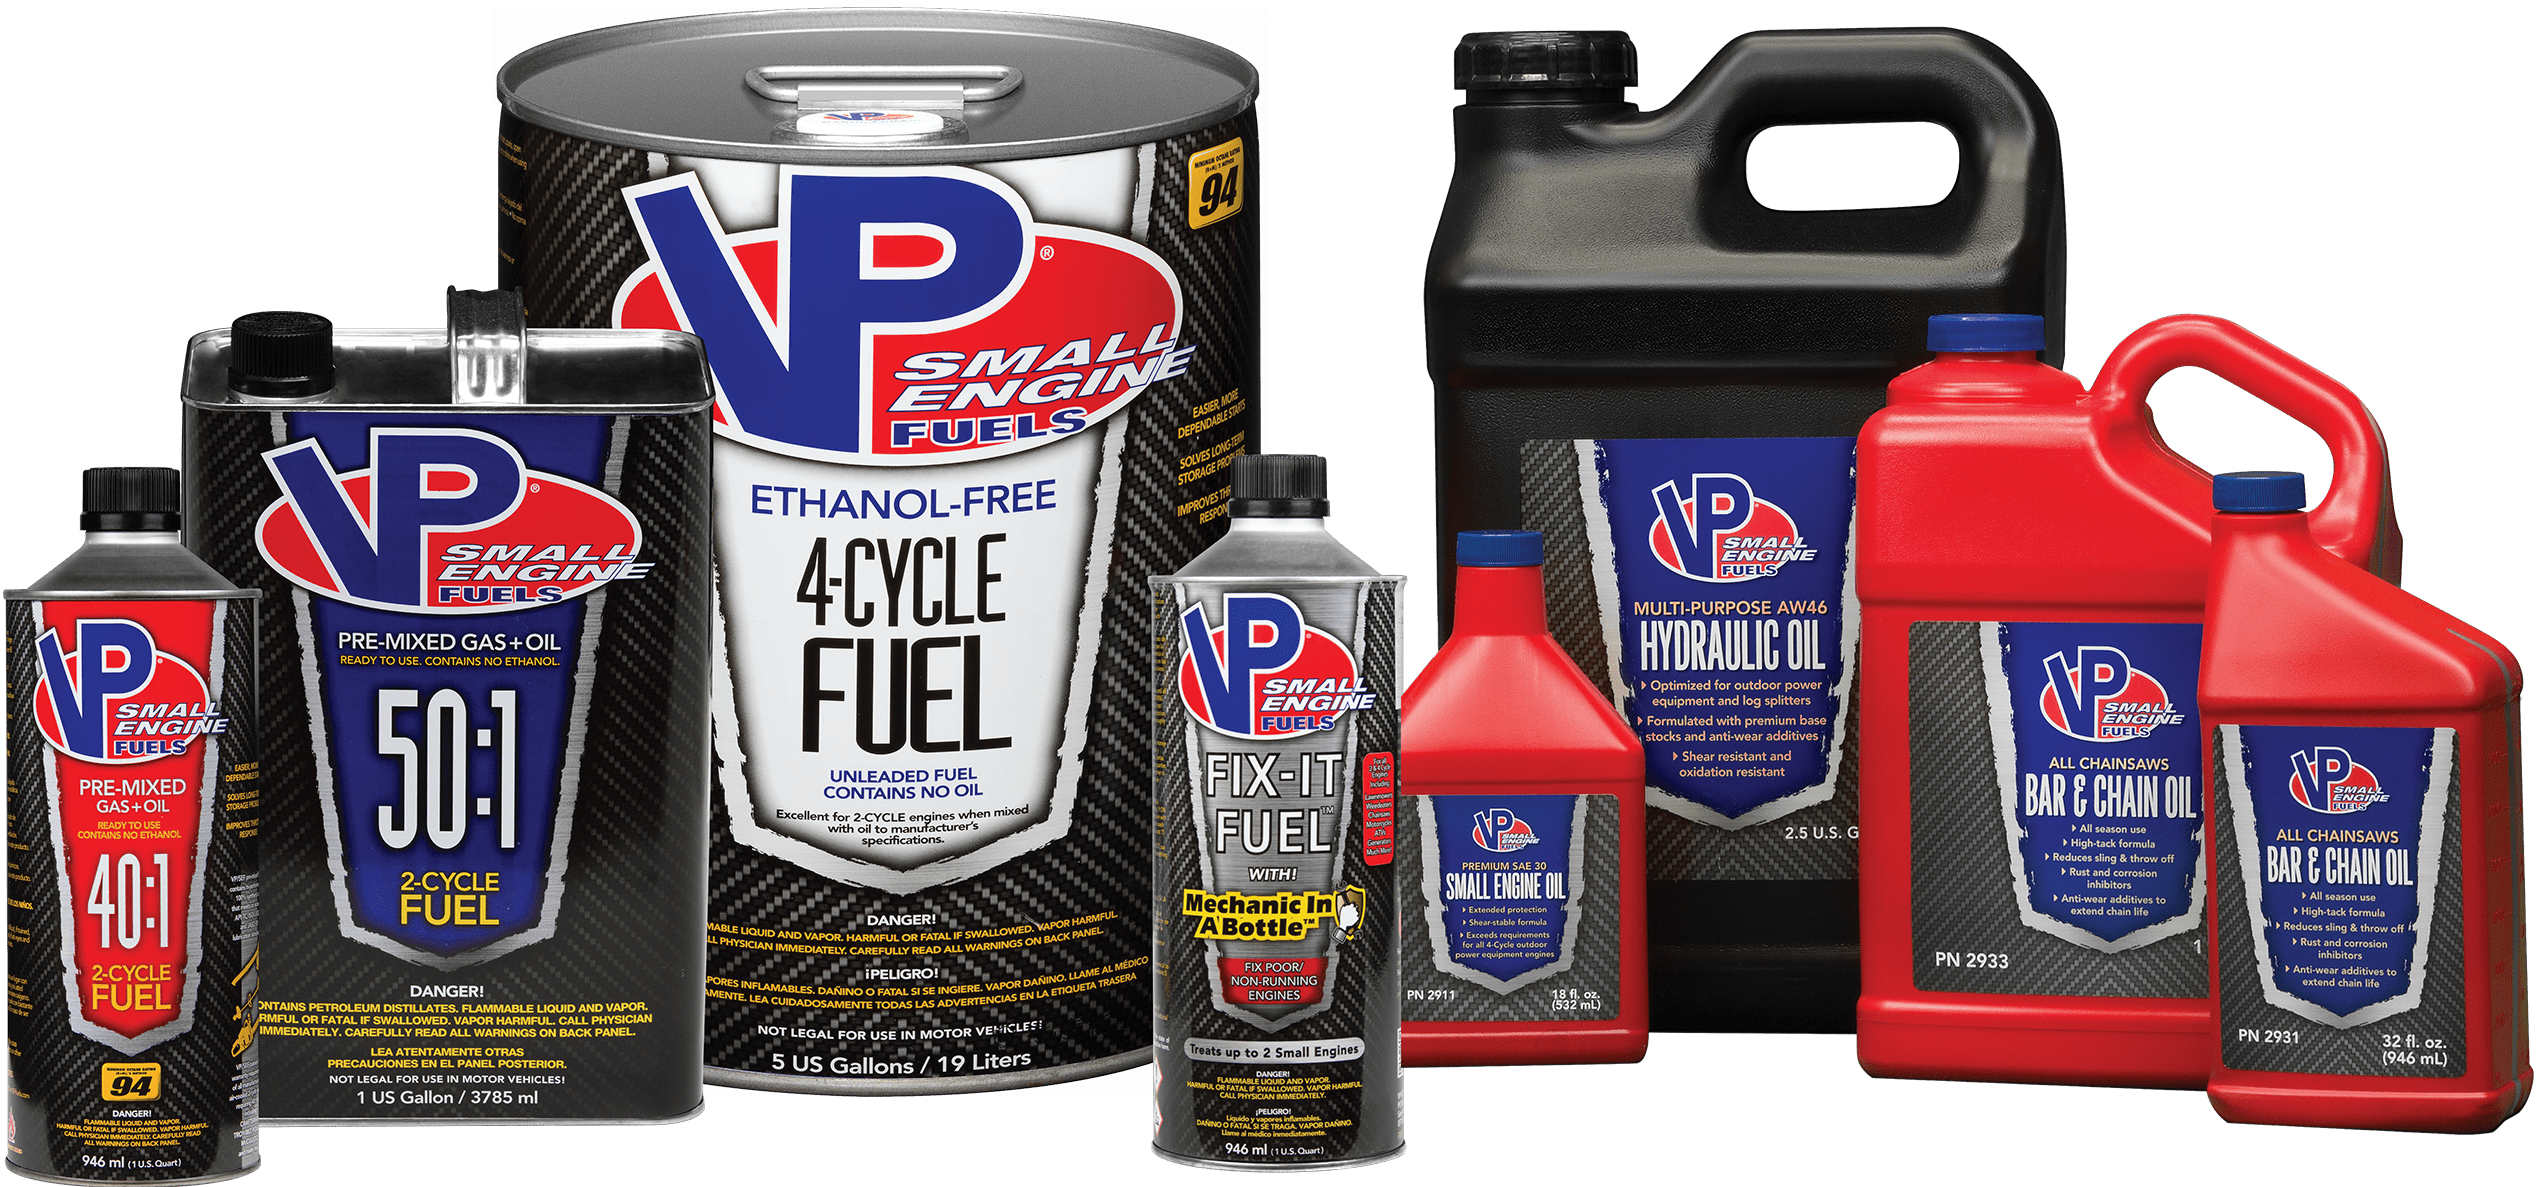 VP's line of fuel and oils for small outdoor power equipment